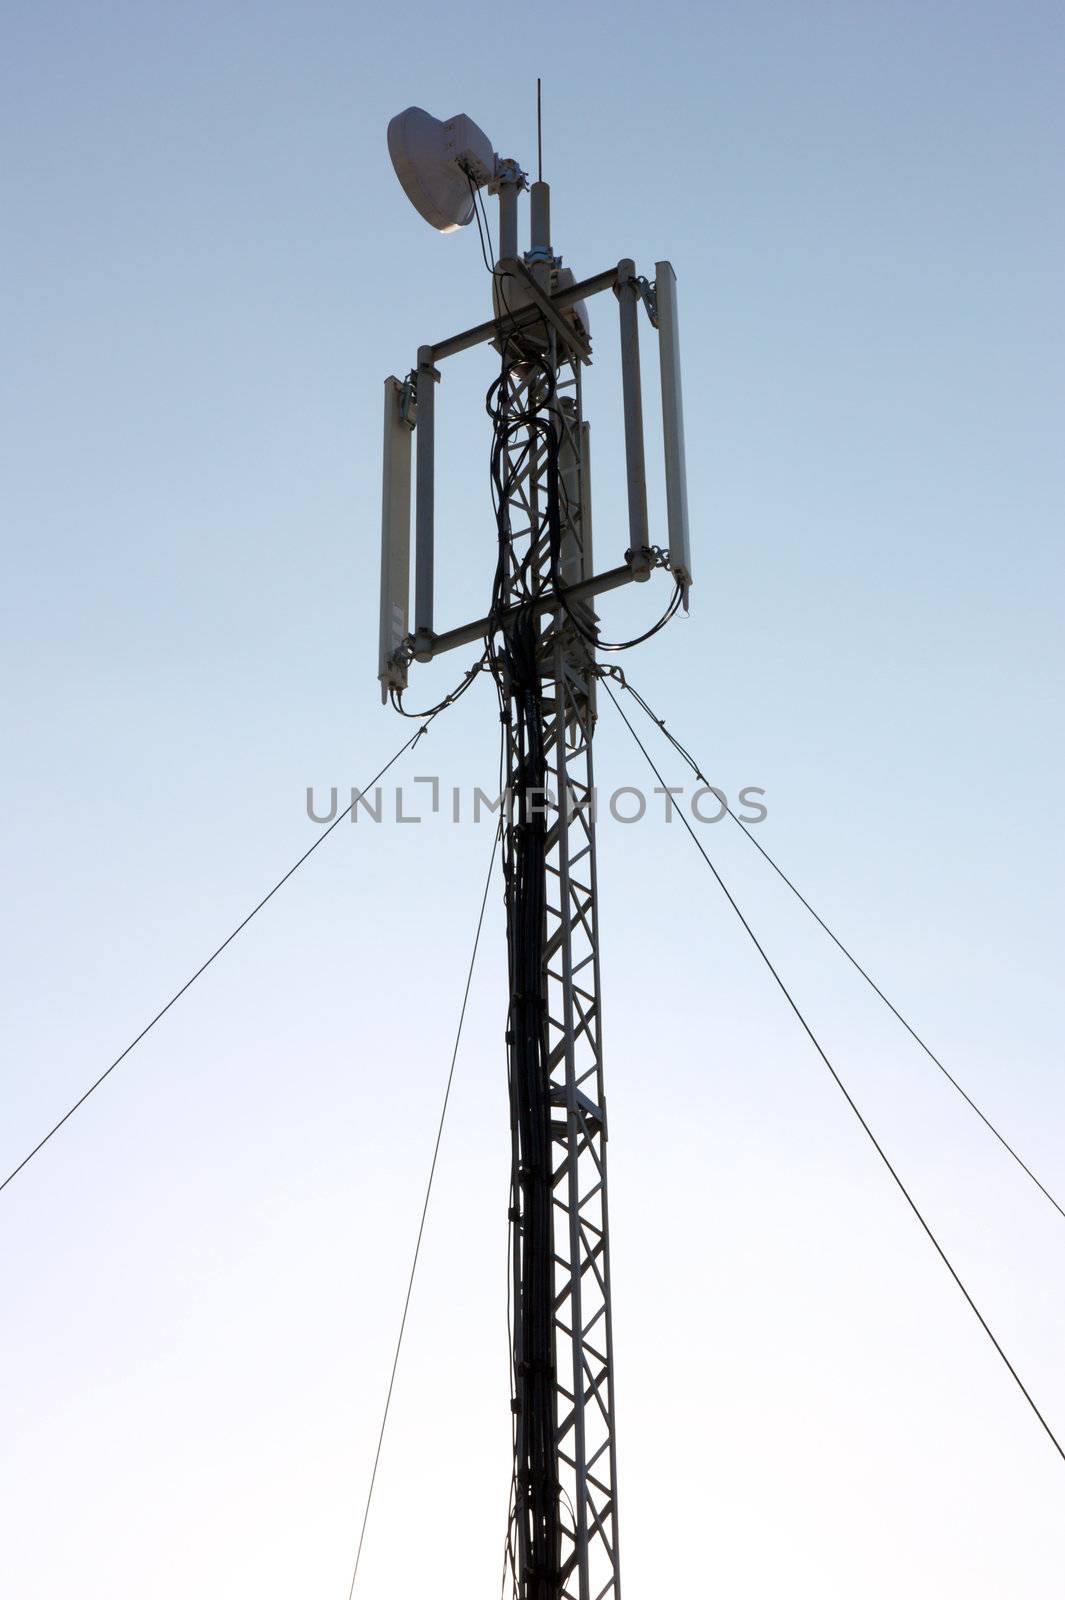 Aerial mobile communication against the blue sky on a sunset